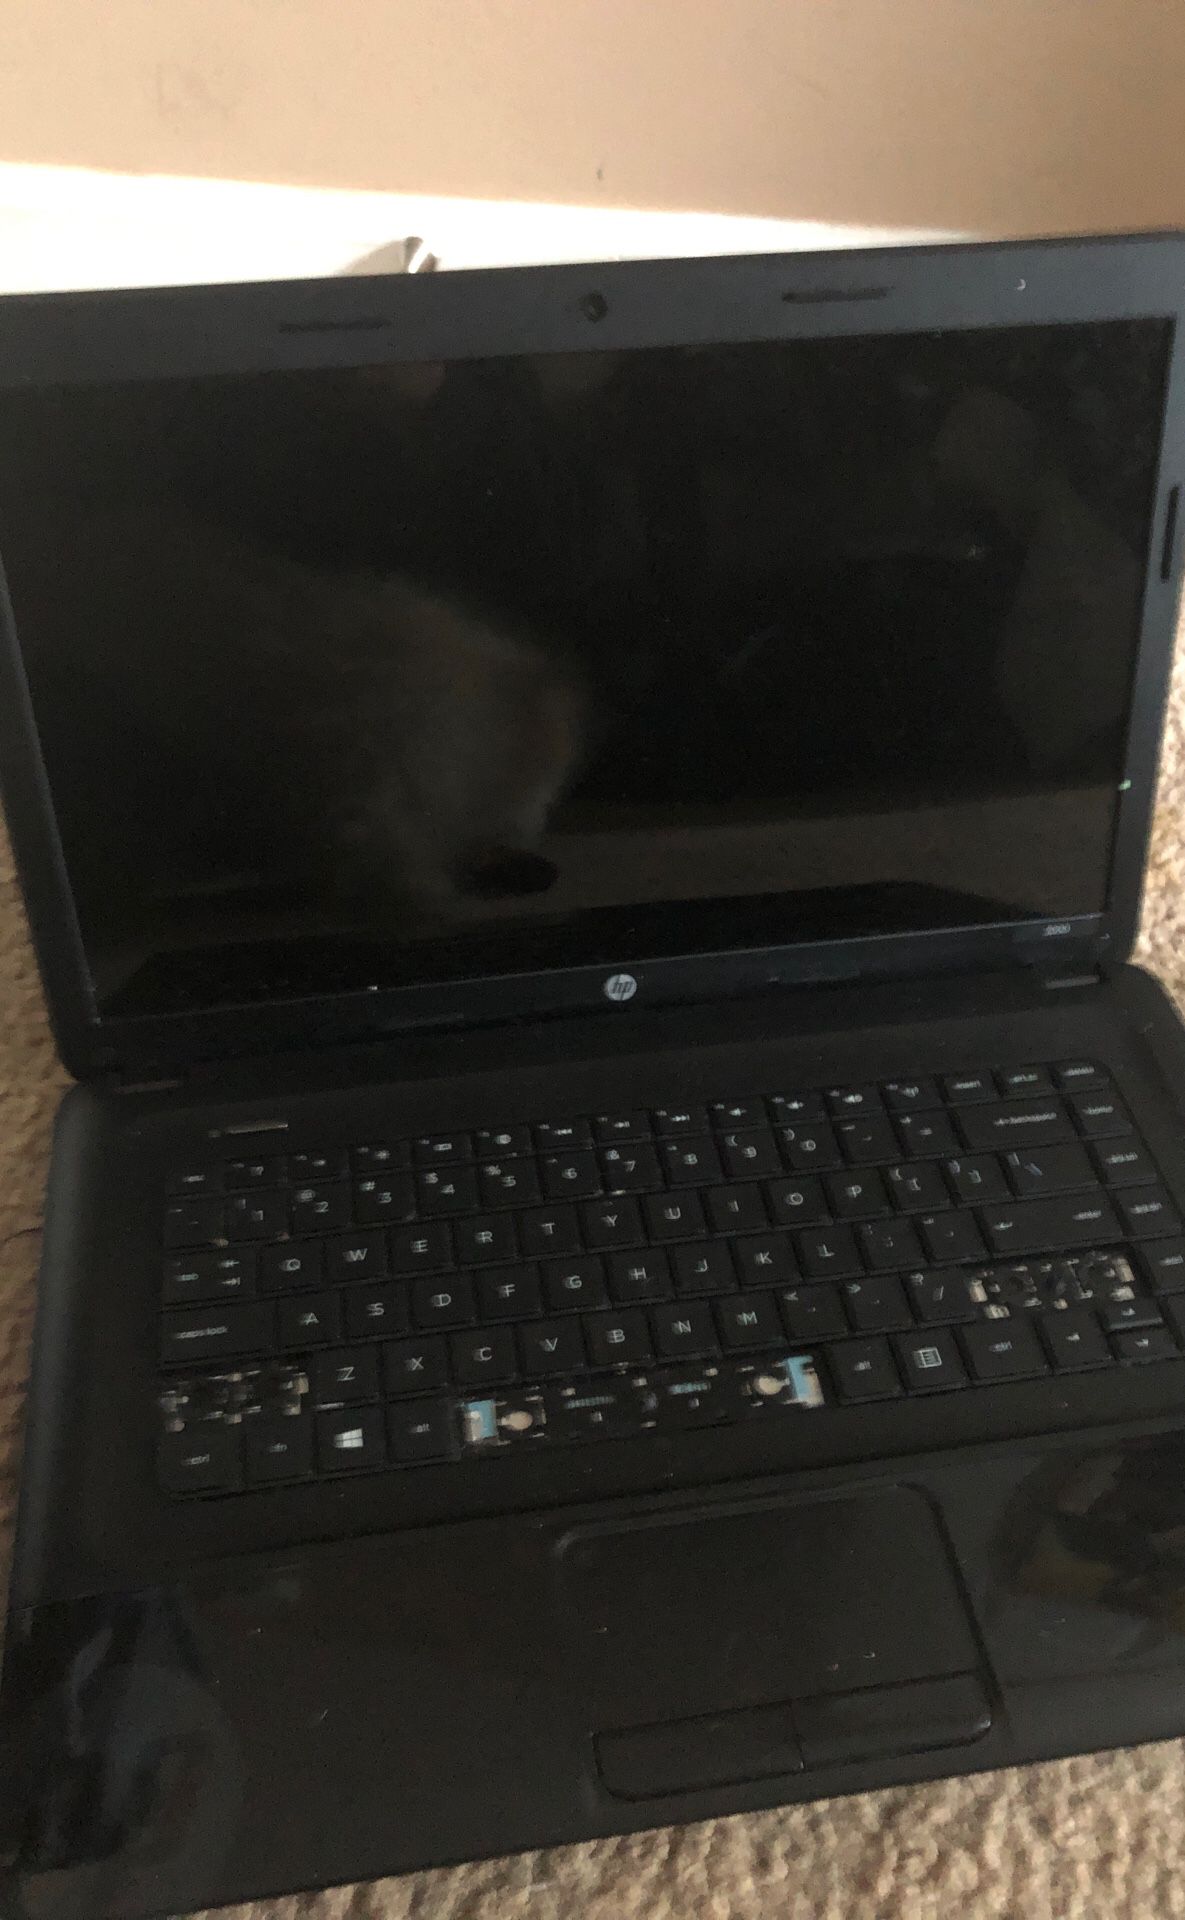 Laptop (Selling for parts)